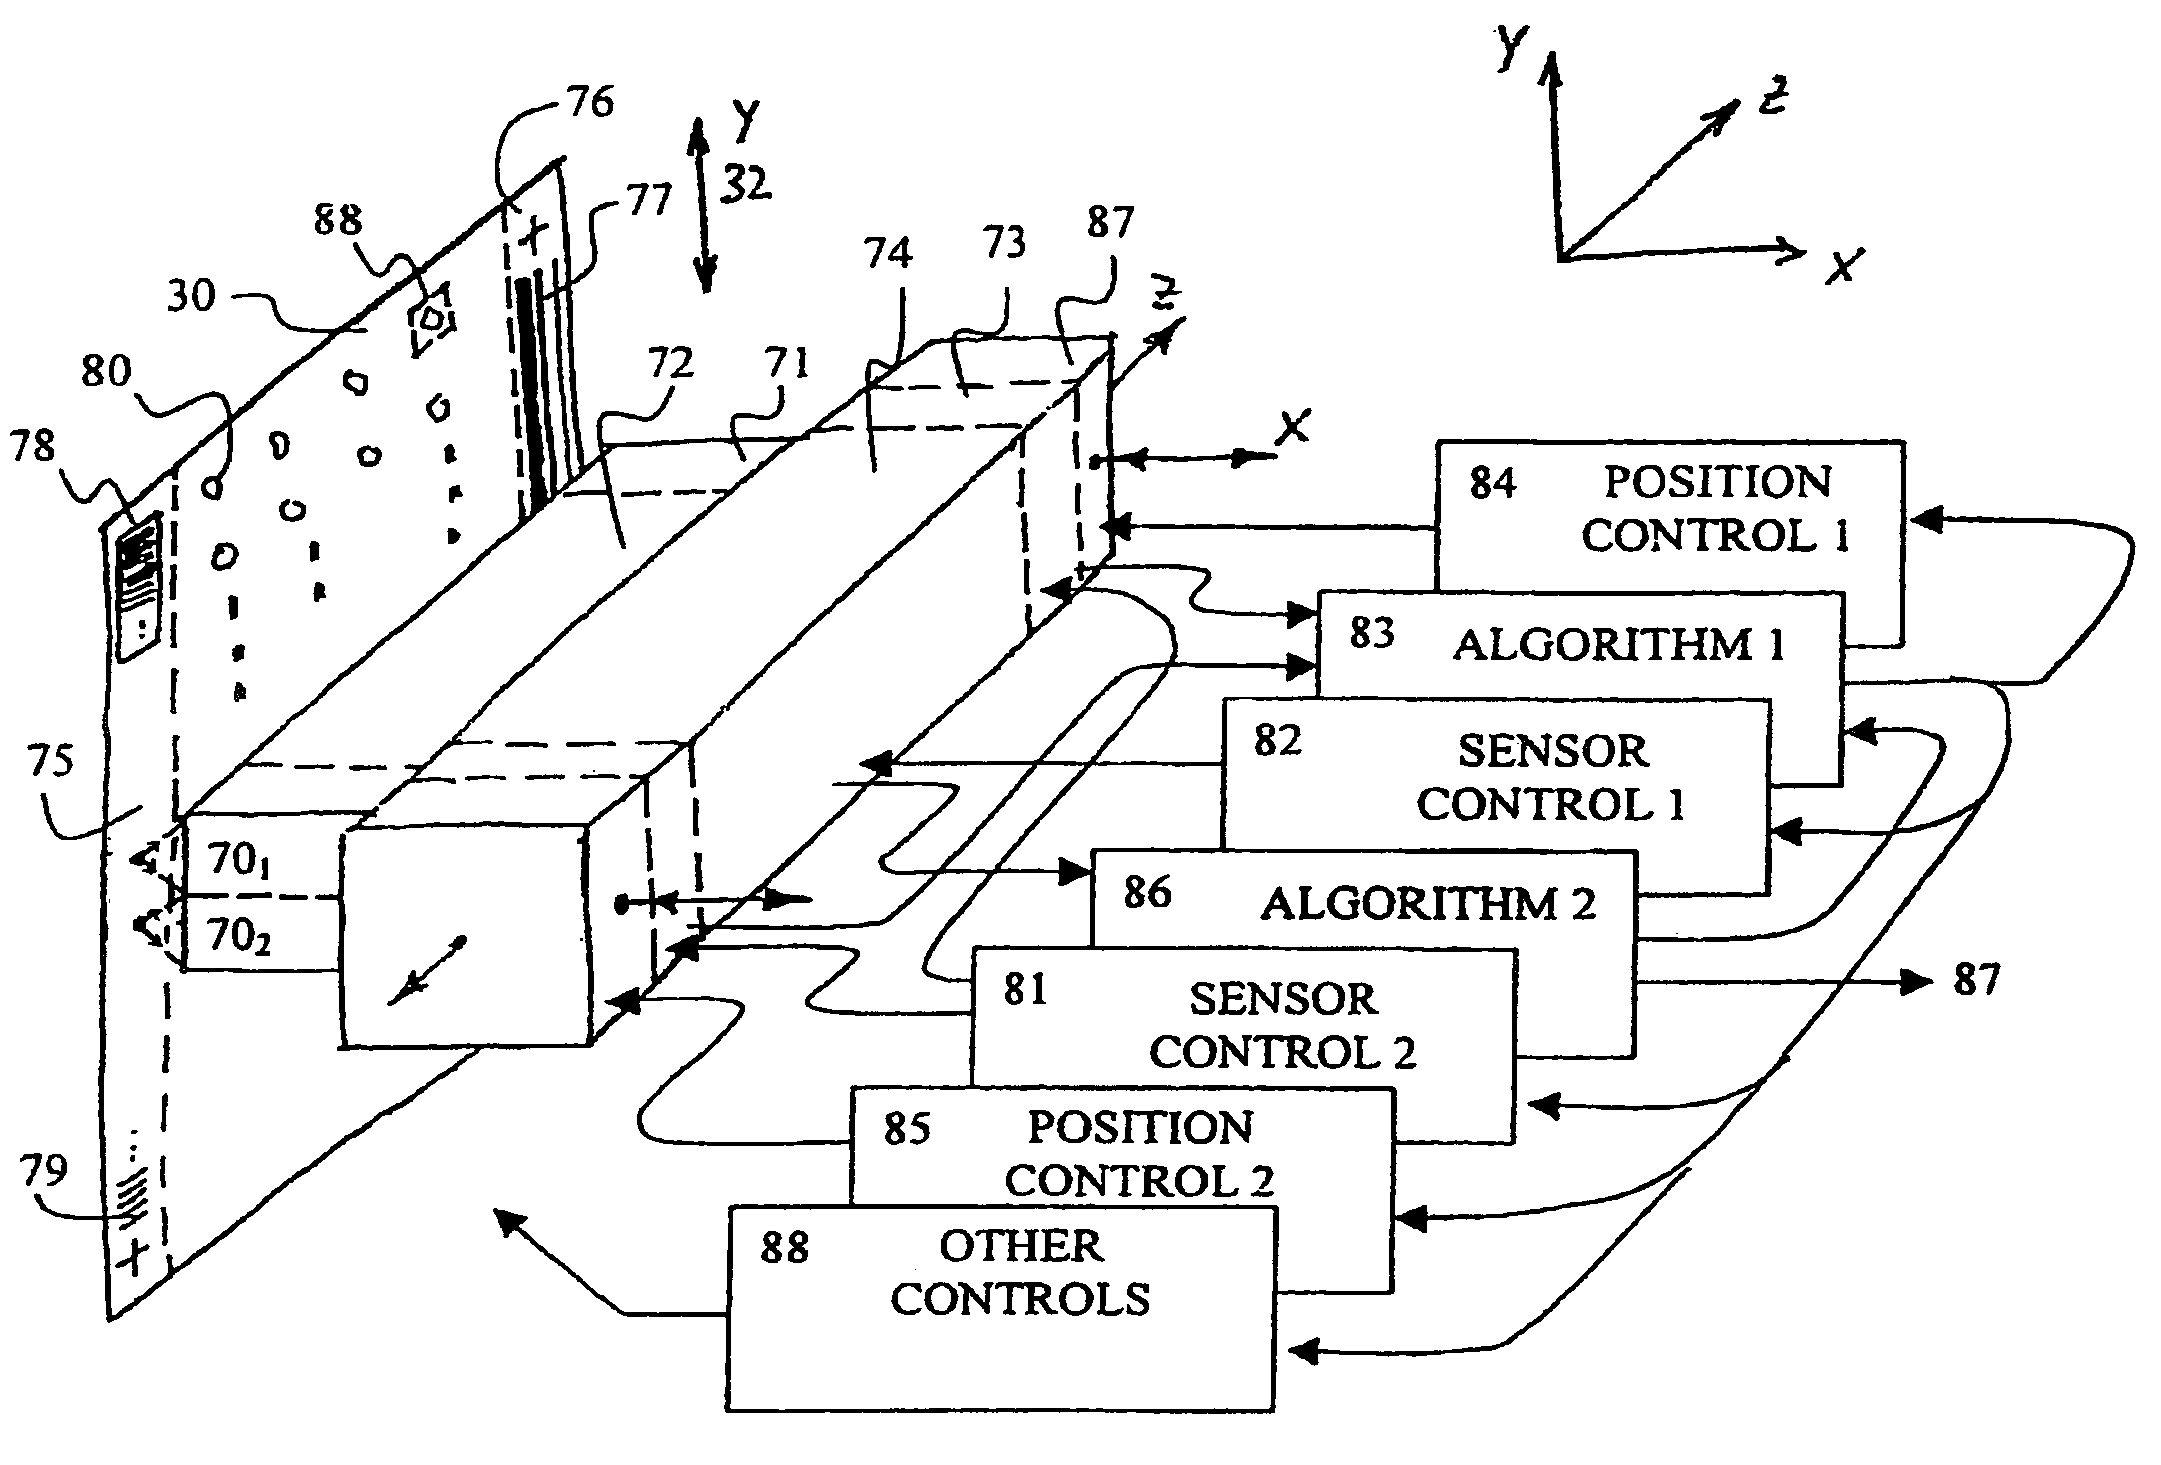 Apparatus and method for photo-electric measurement